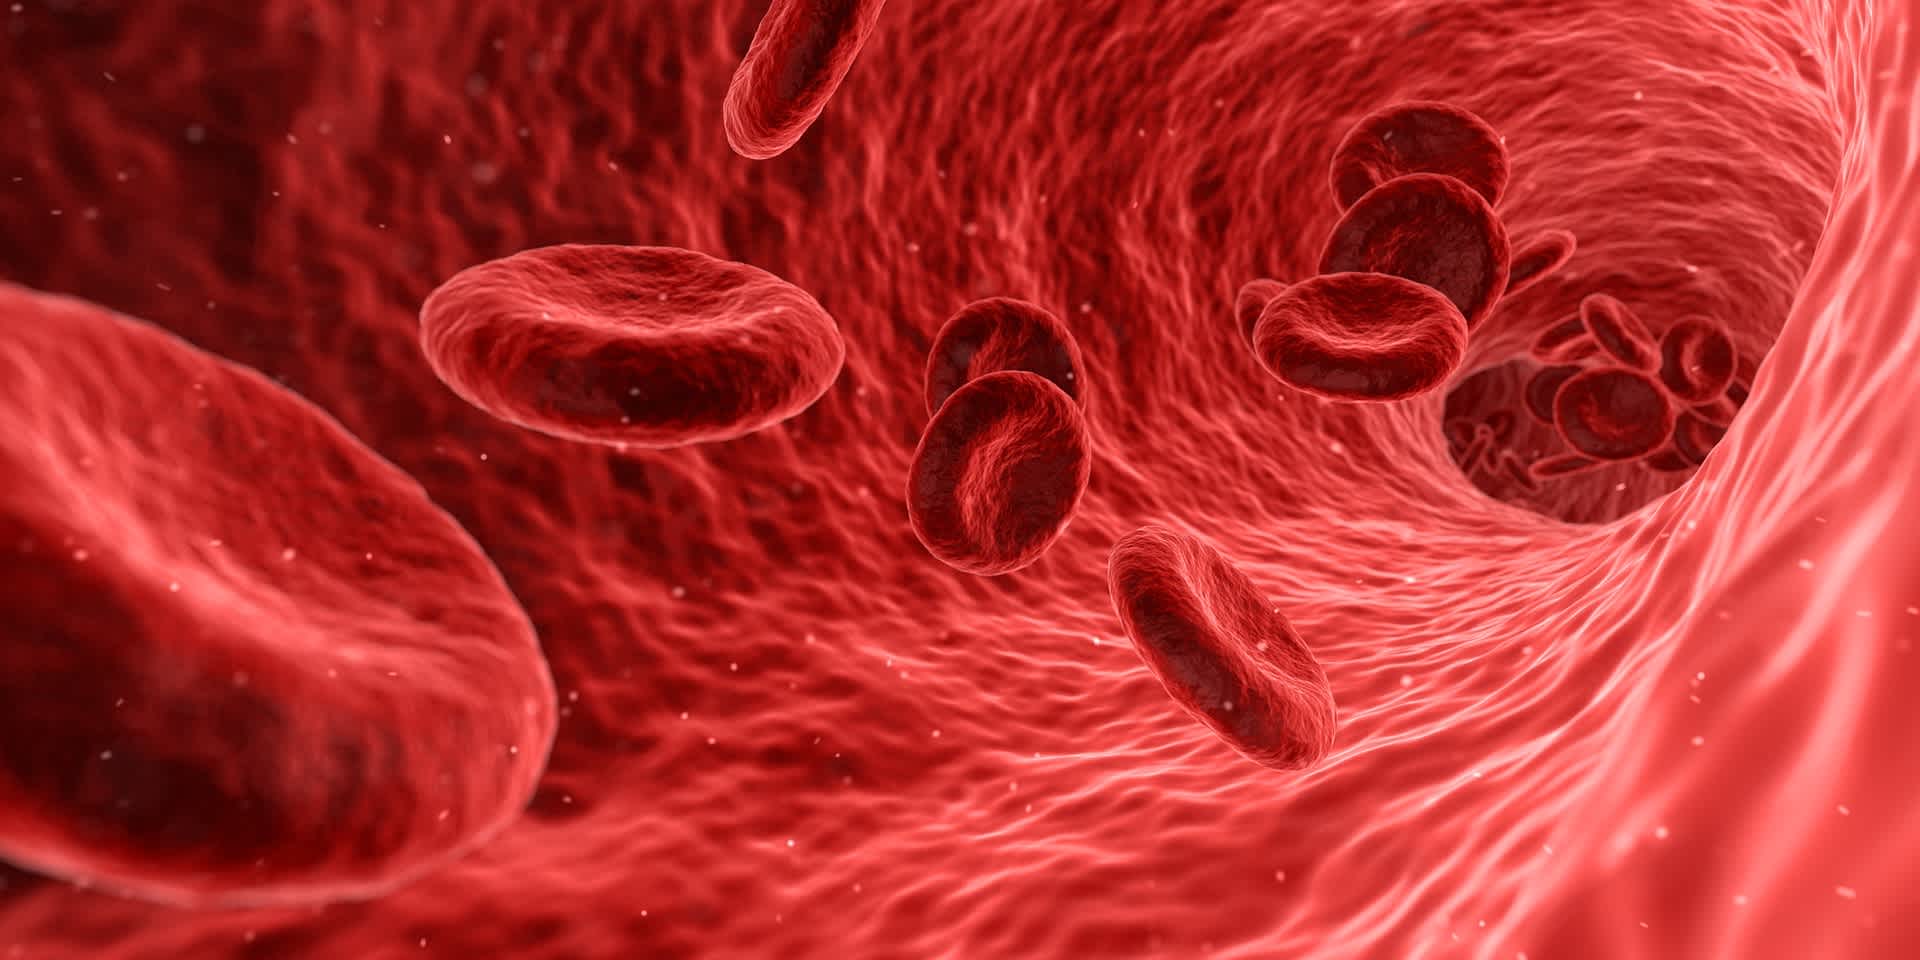 Illustration of red blood cells to represent high blood pressure